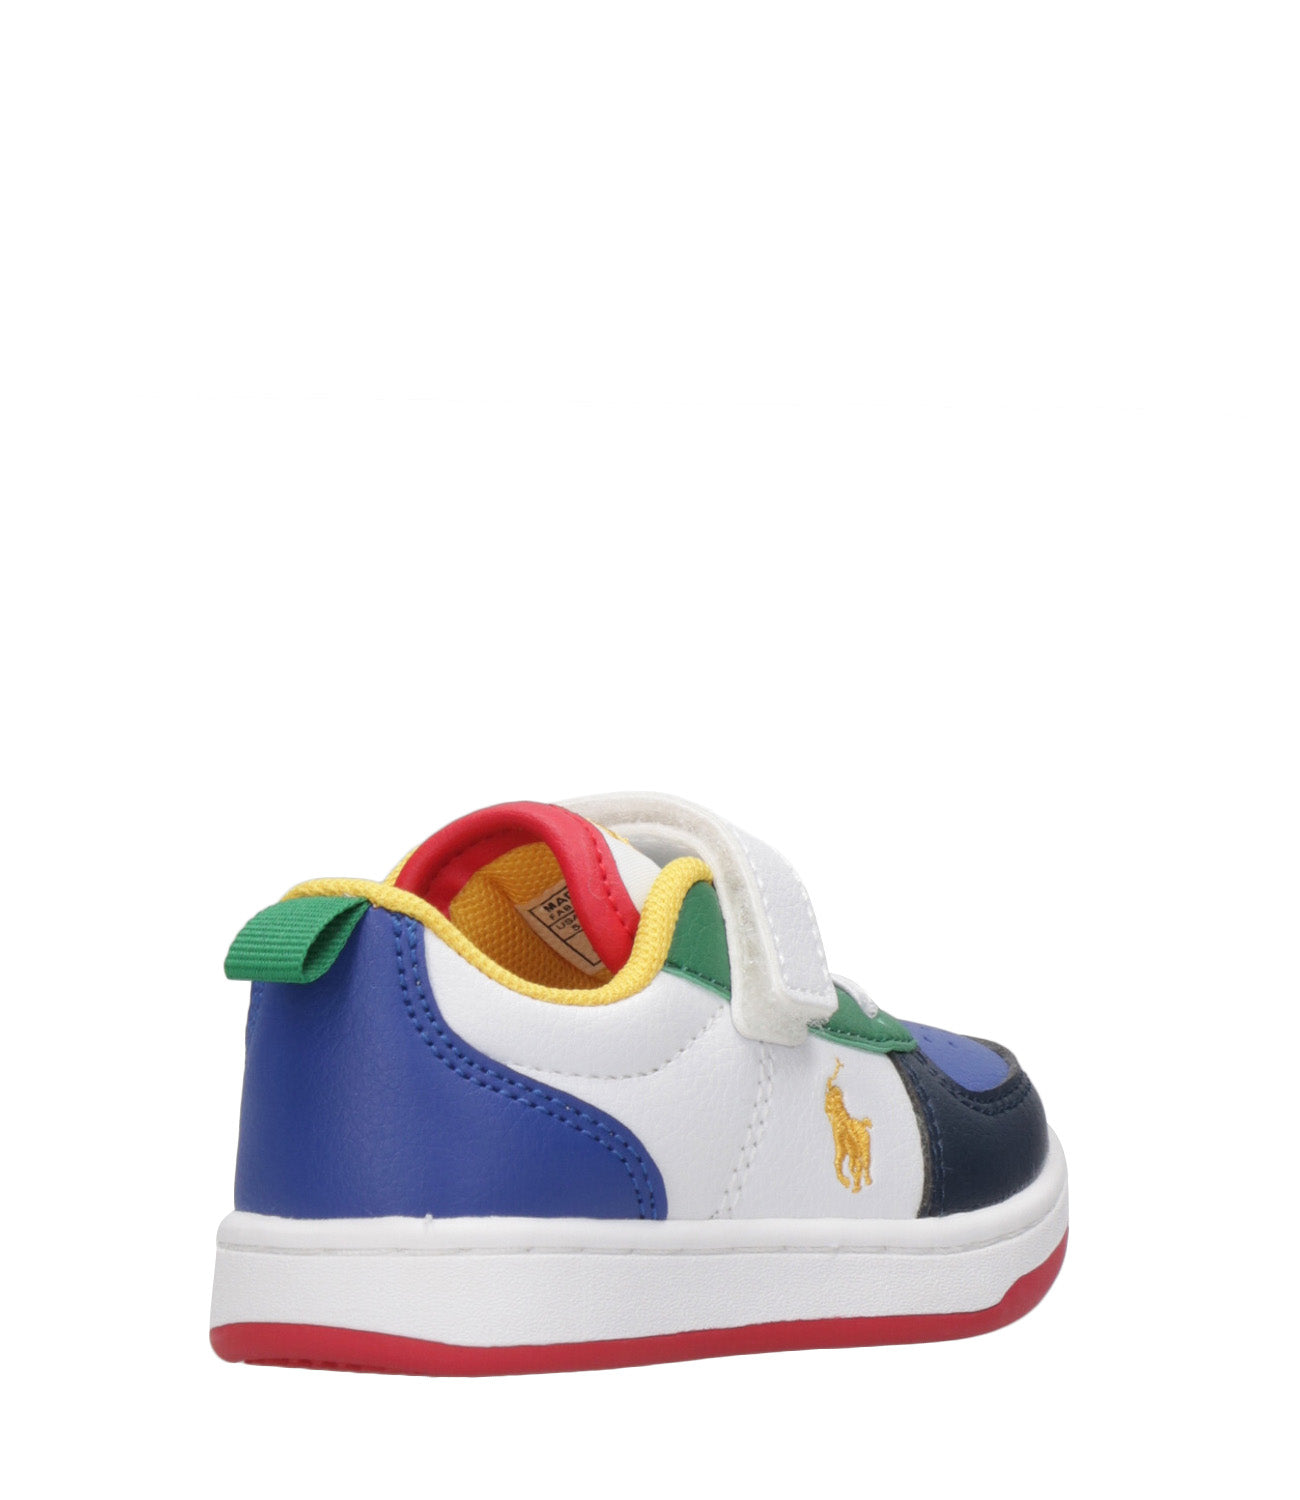 Ralph Lauren Childrenswear | Sneakers Court II PS White and Navy Blue